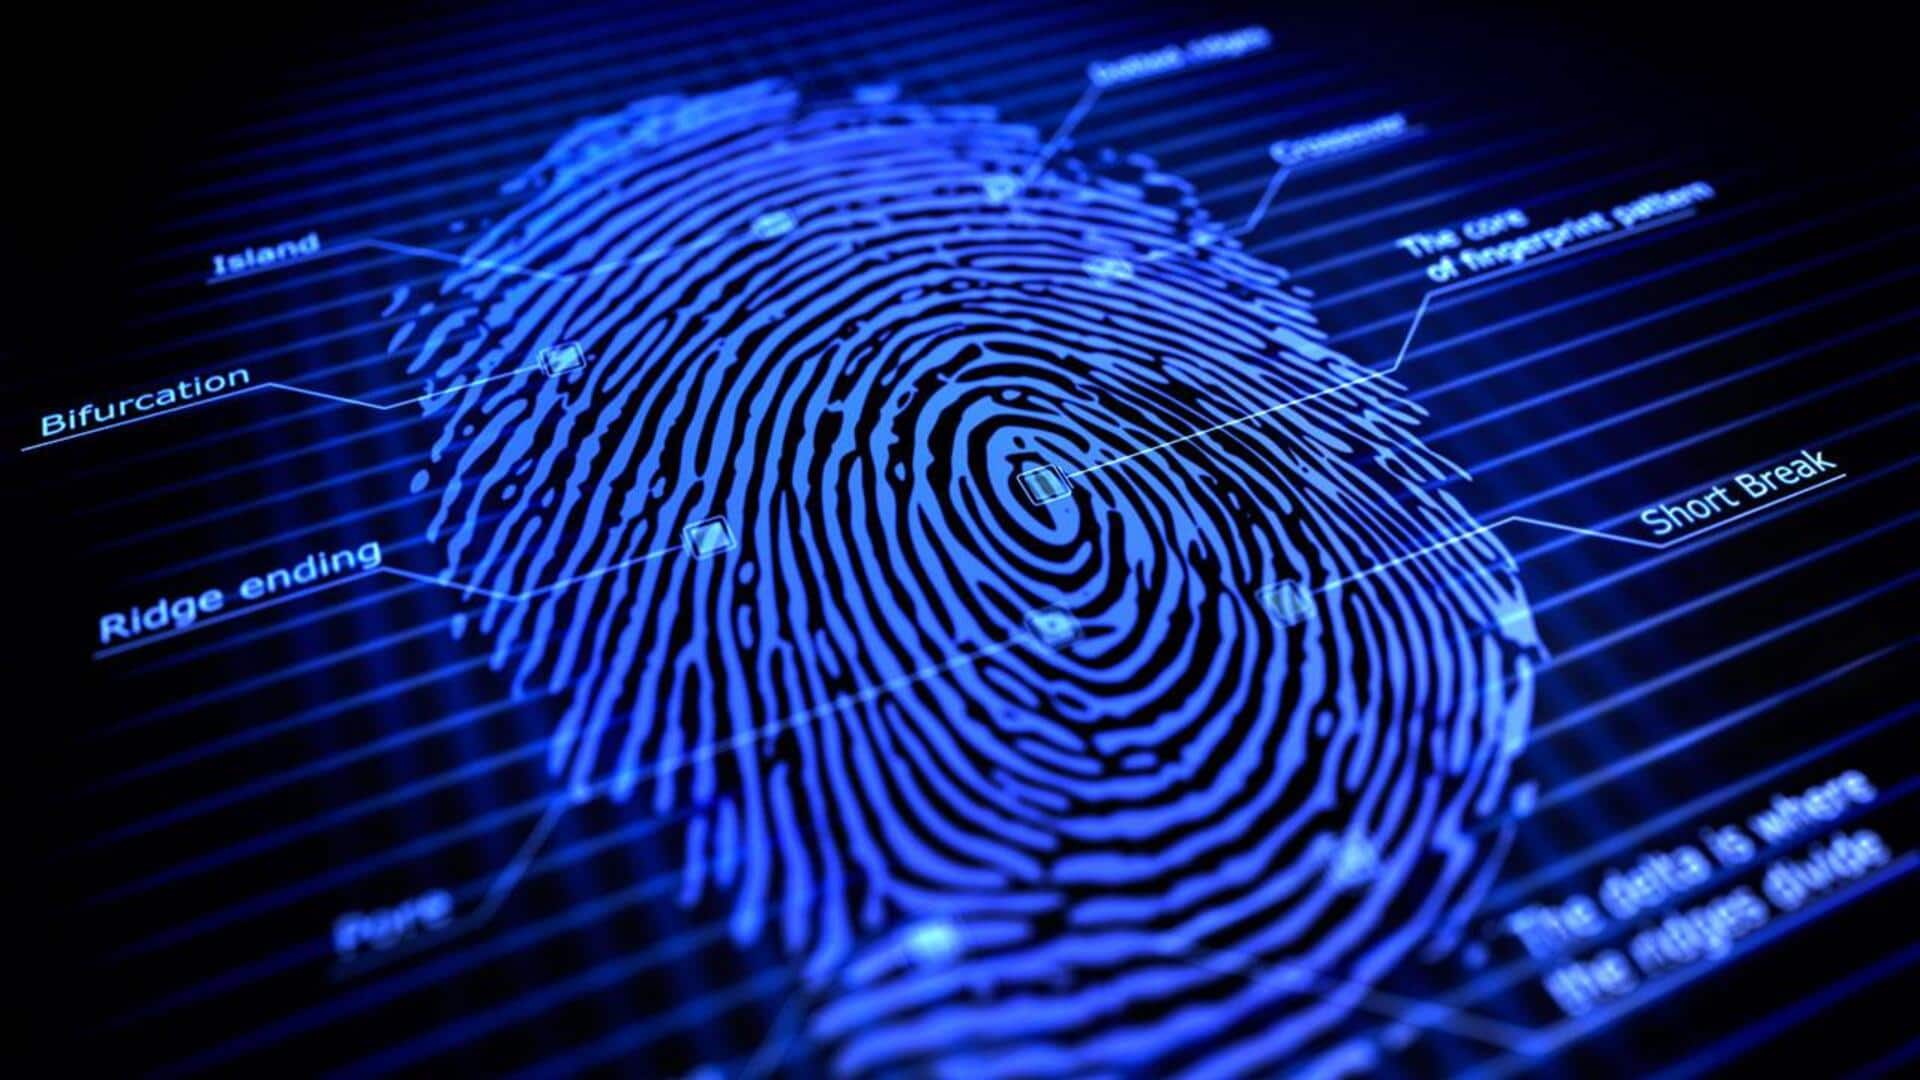 Are our fingerprints really unique? AI claims otherwise